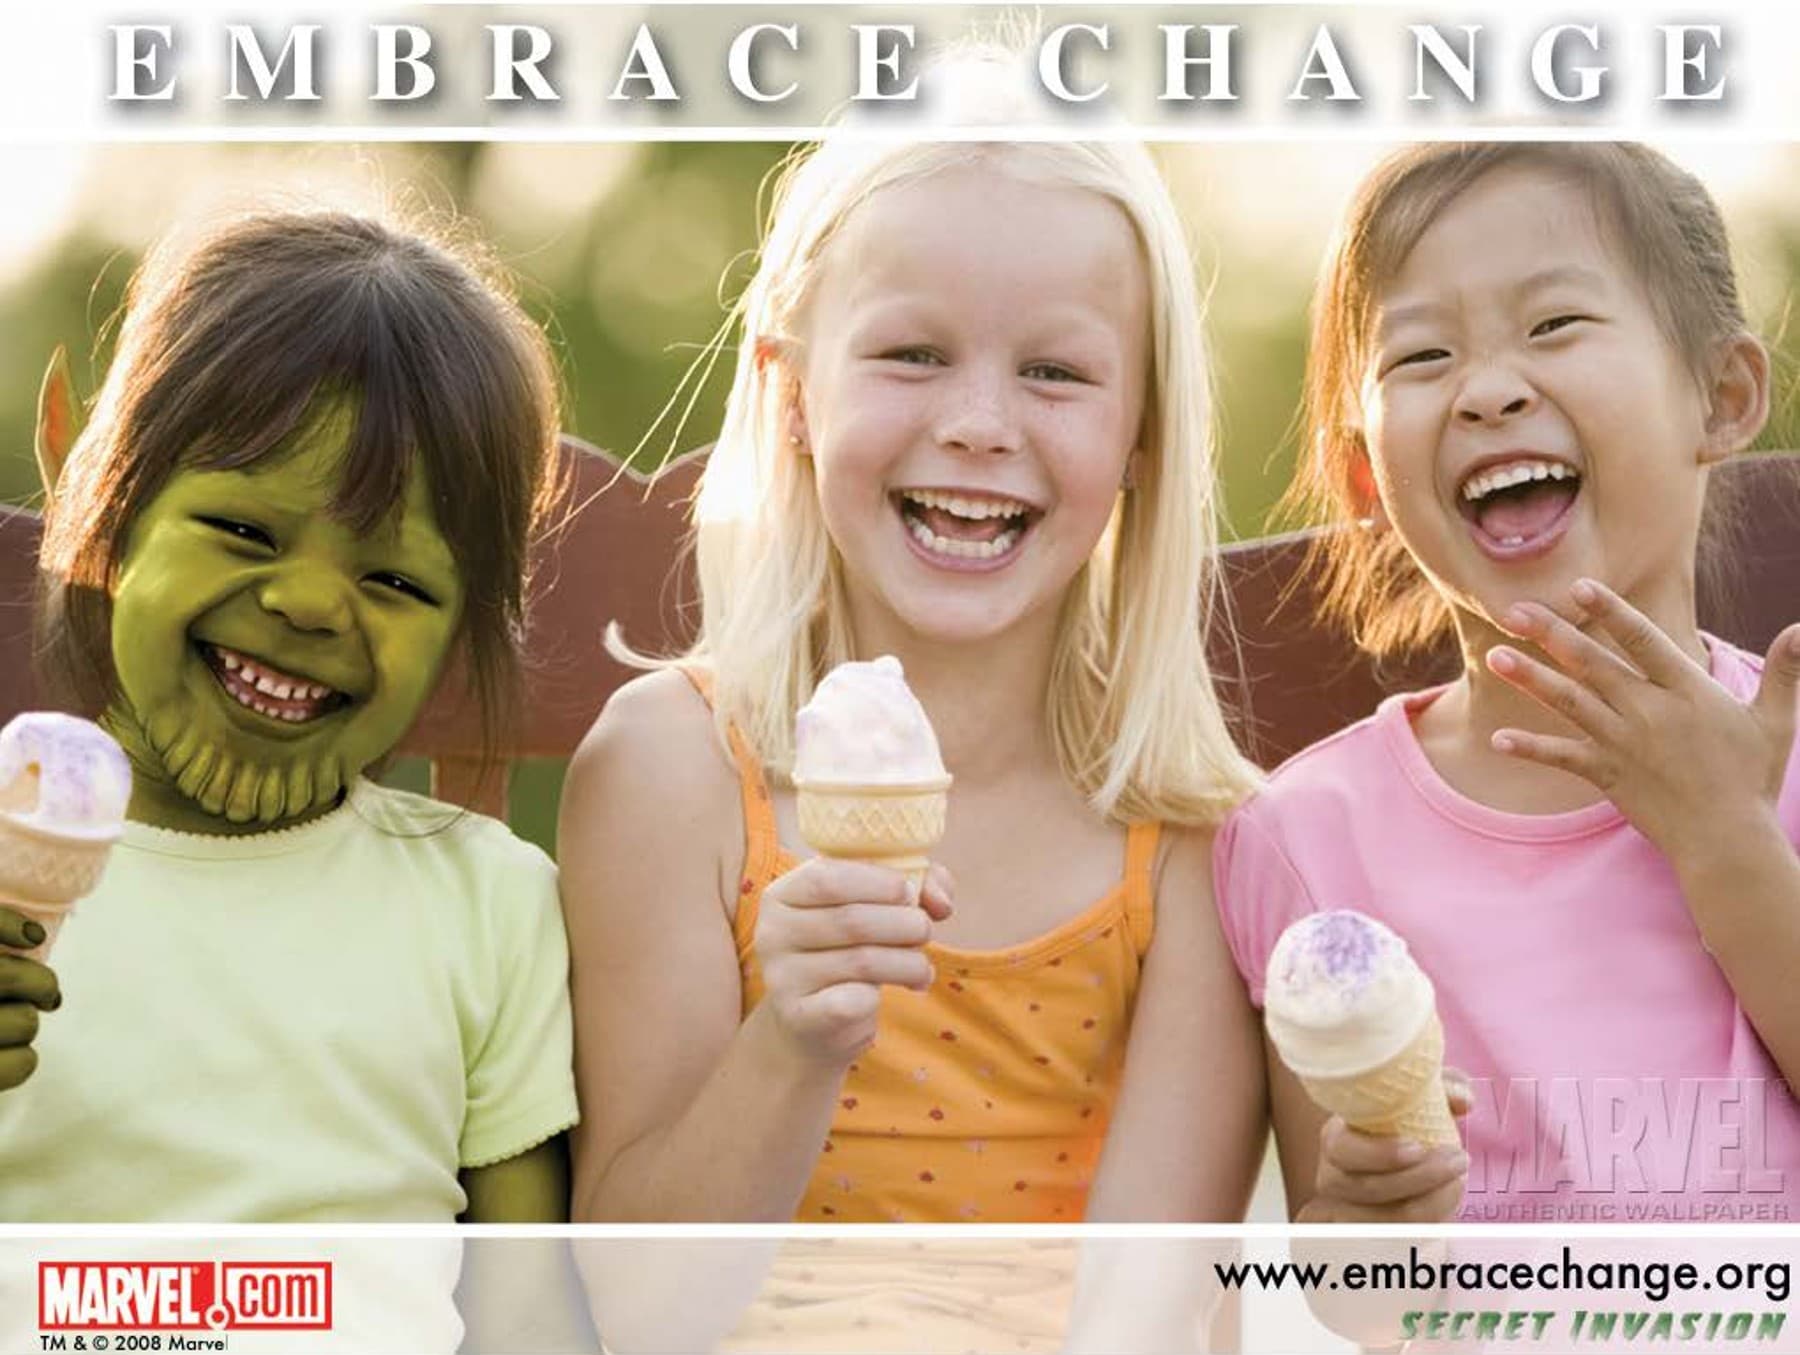 Embrace Change Promotional Image: Two Human Girls Enjoy Ice Cream with a Skrull Child